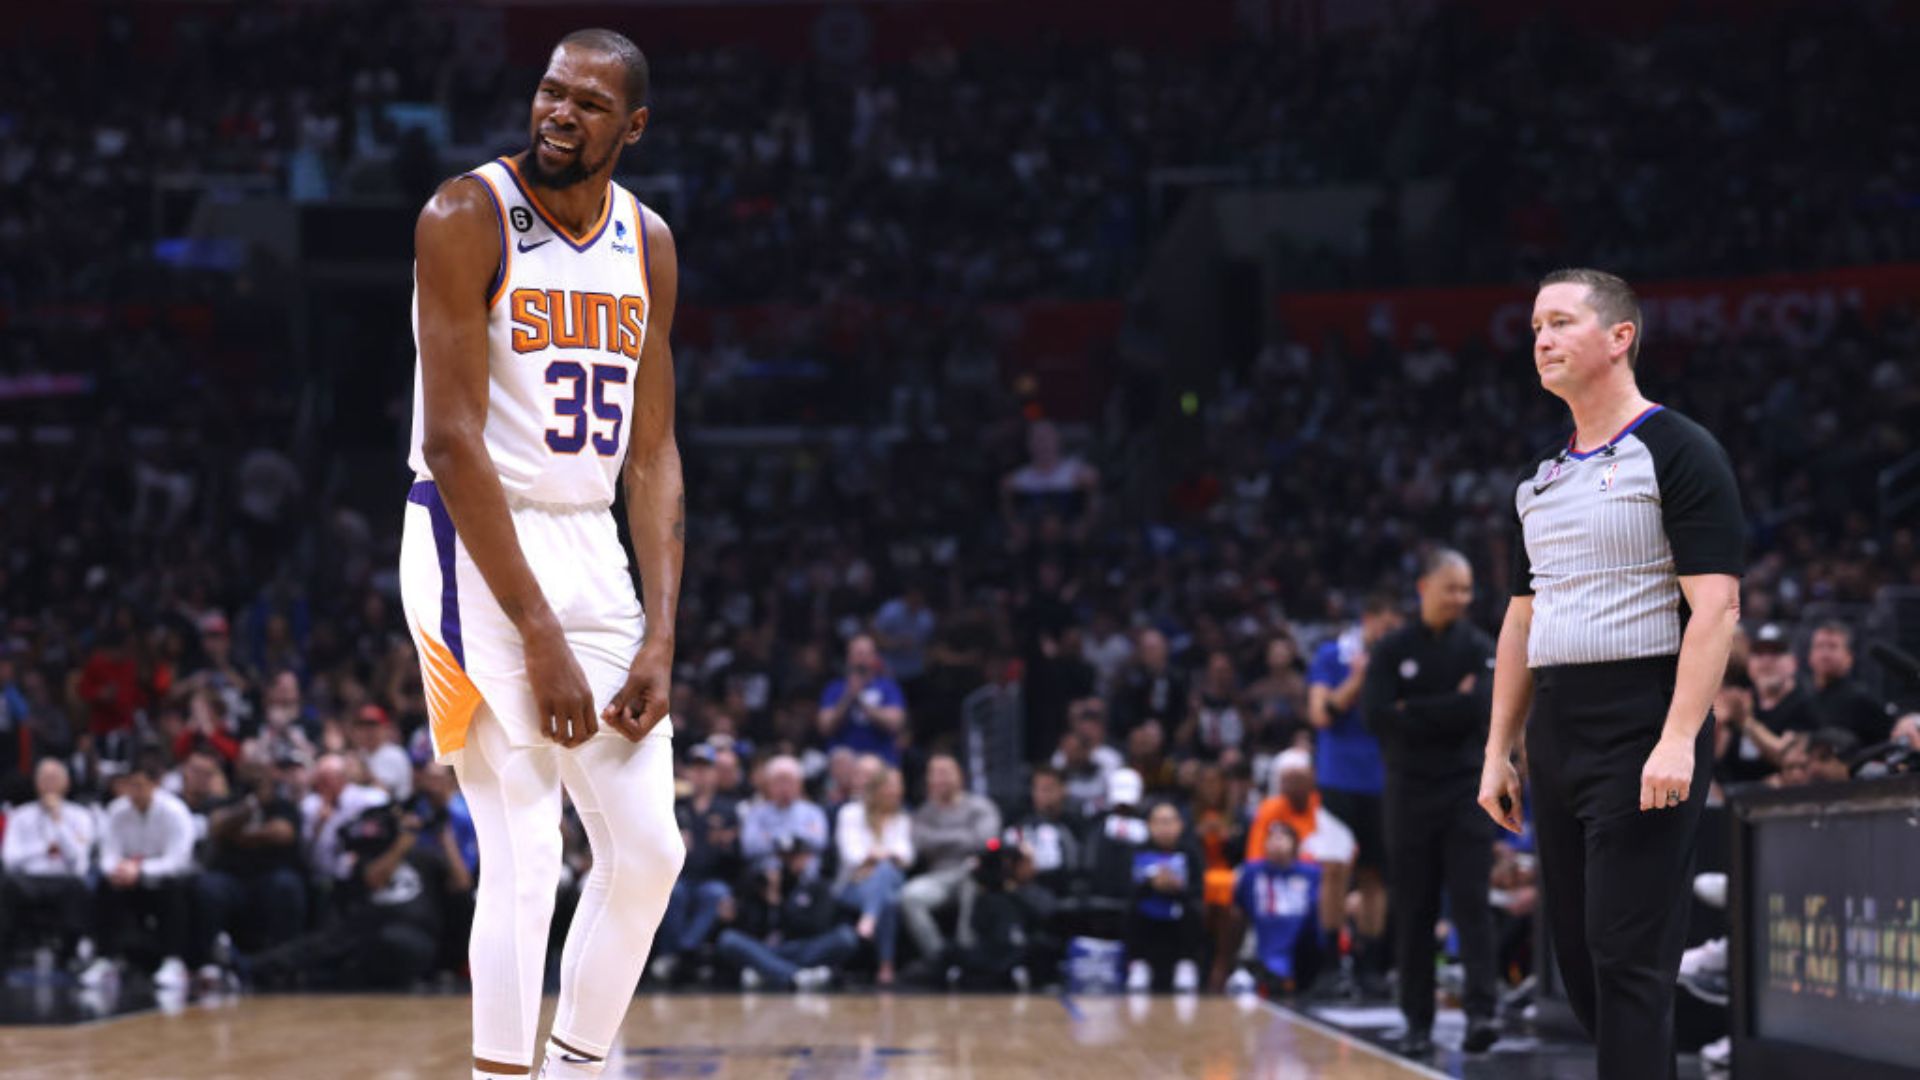 Durant stood out for the Suns